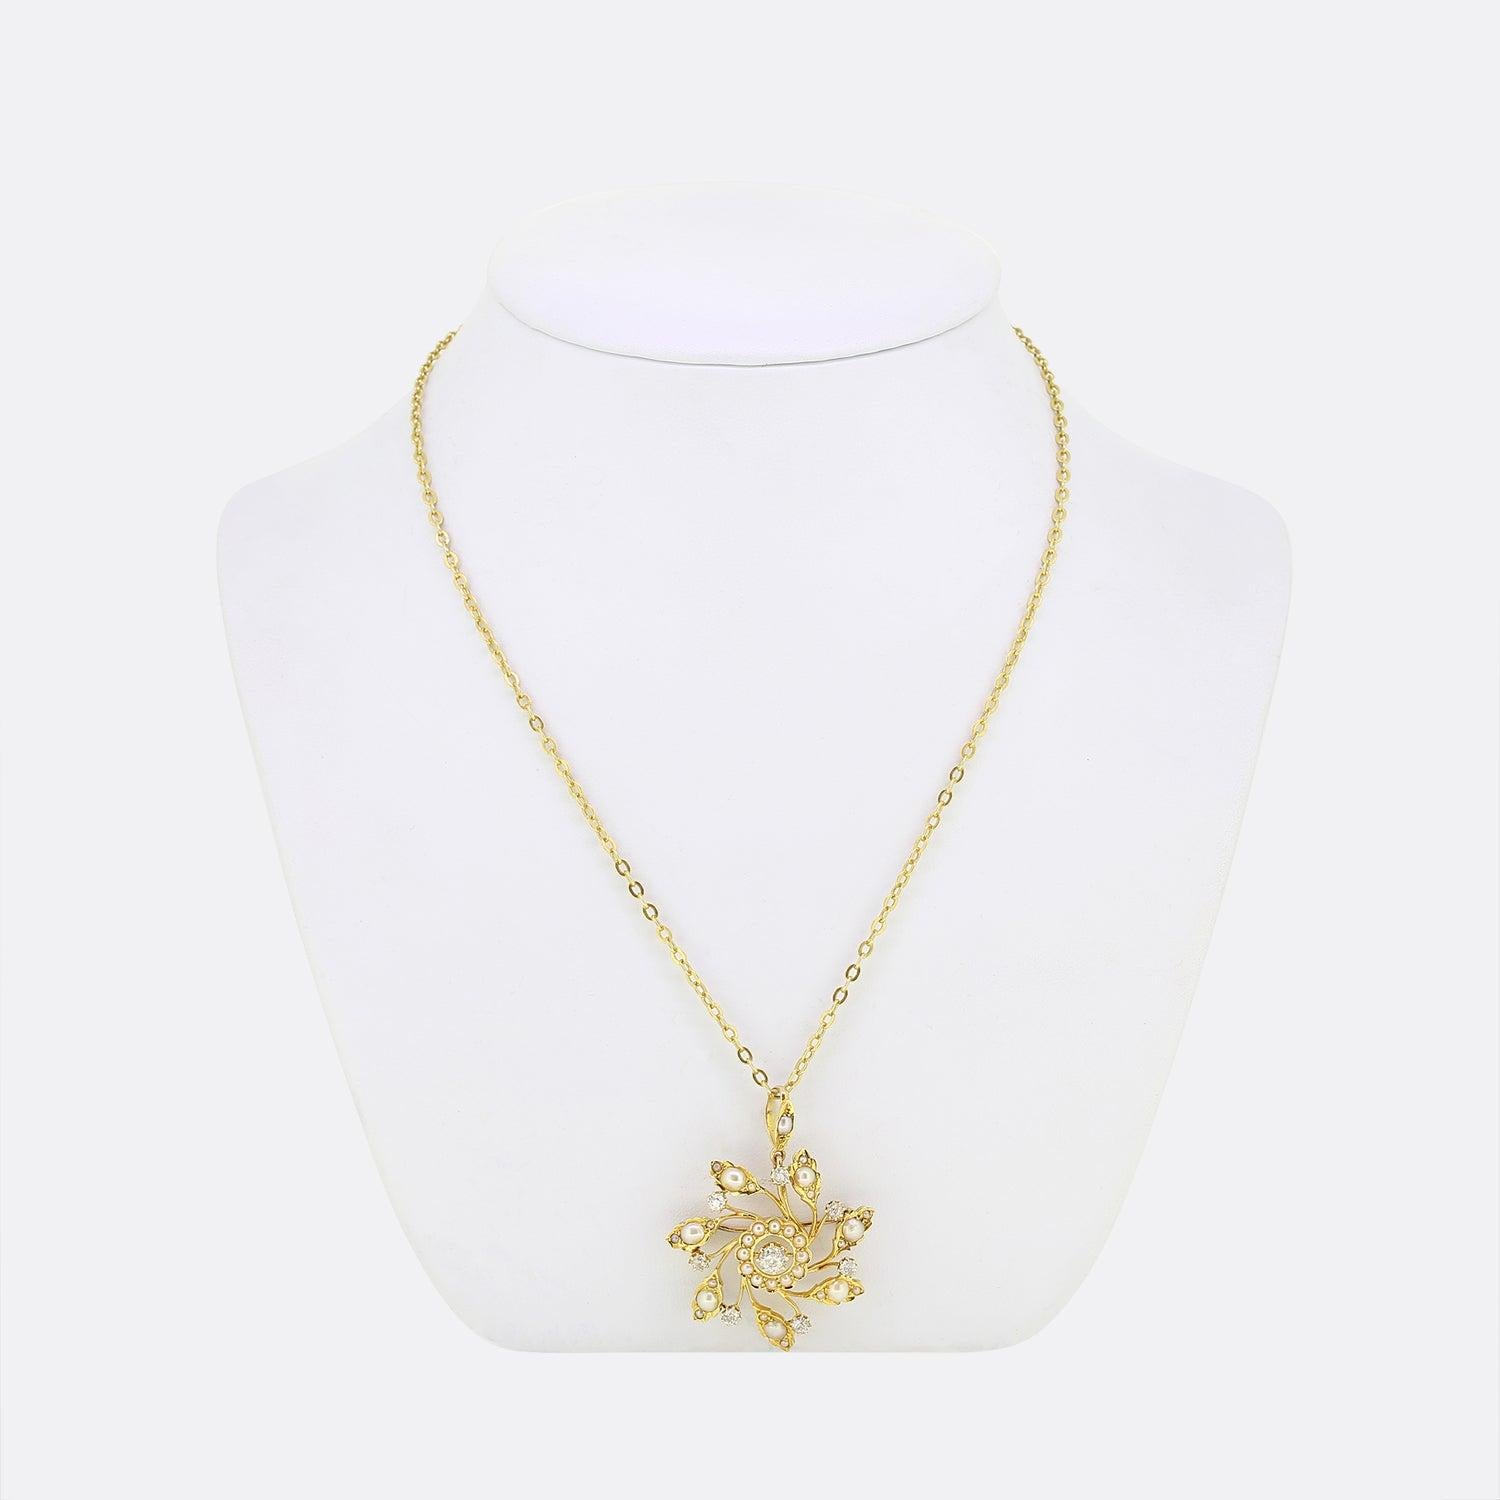 This is a Victorian pearl and diamond necklace. The piece showcases a heavily detailed, hand crafted sunflower pendant crafted in 15ct yellow gold and features an array of seed pearls and old cut diamonds. The pendant is suspended from a matching